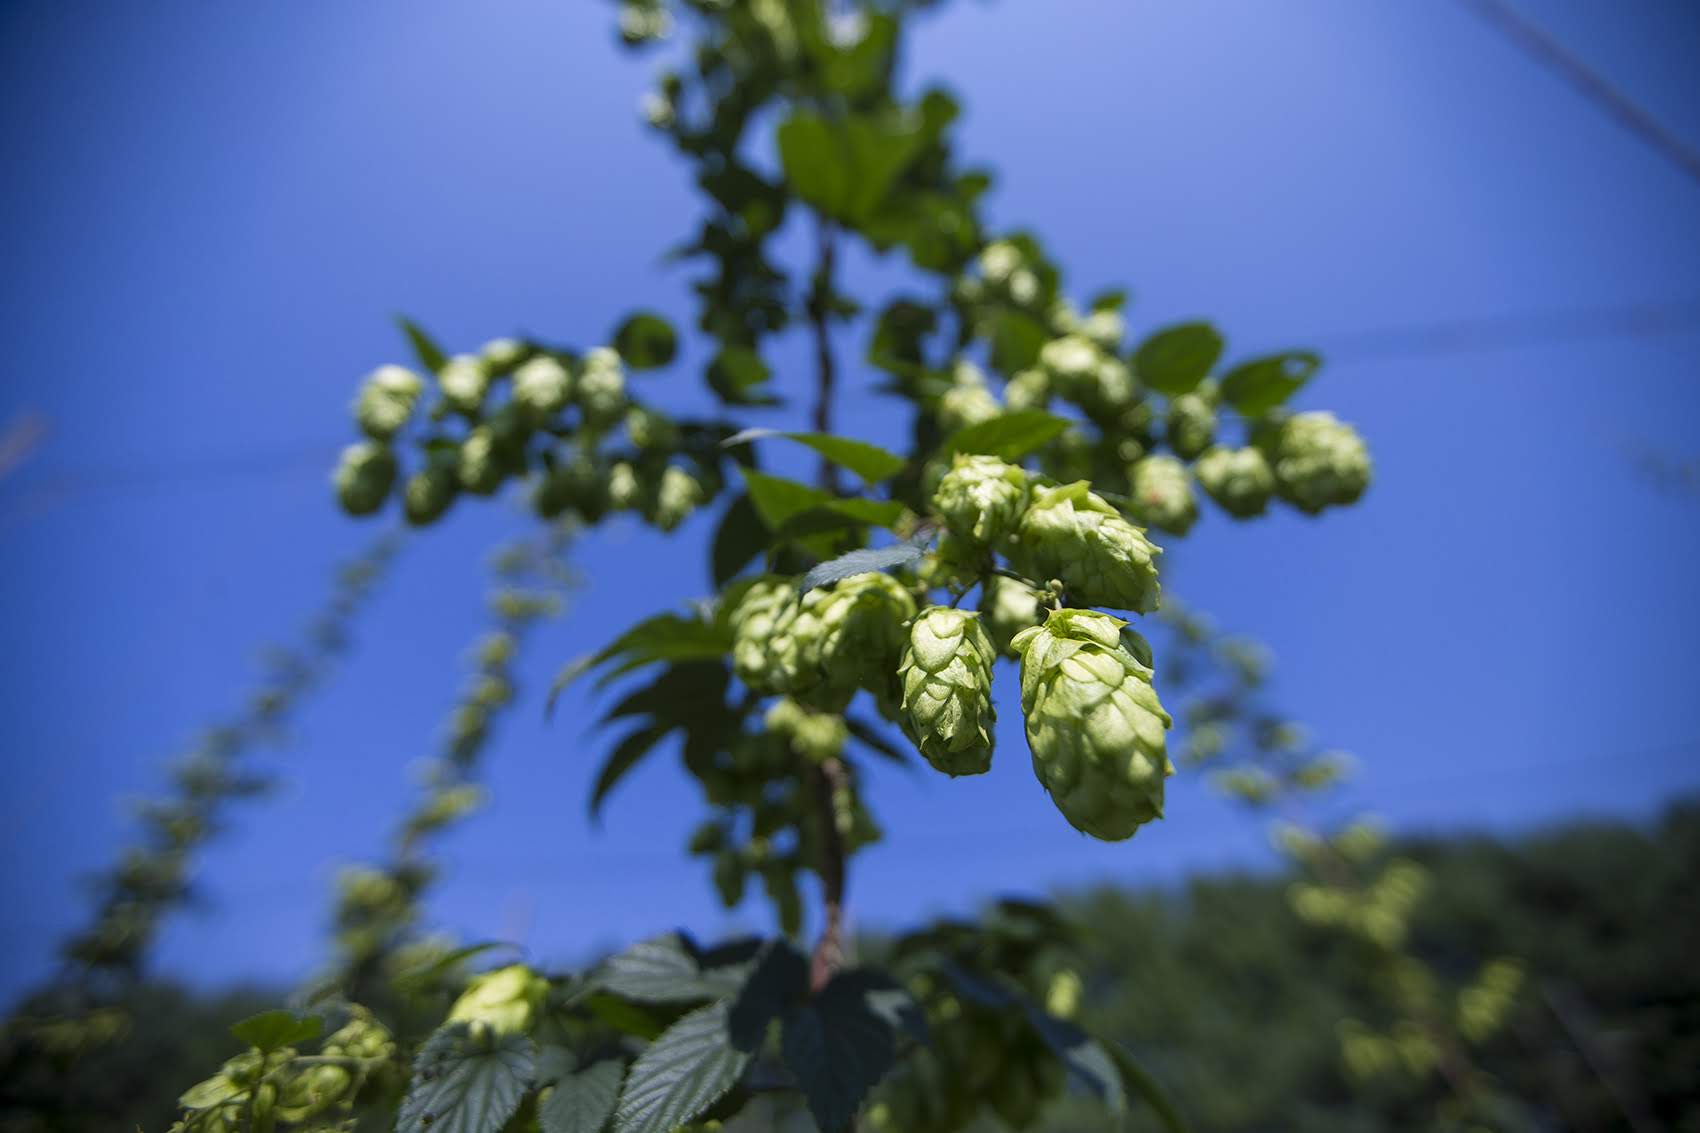 One of Four Star Farms' experimental varieties is this feral hop, which has grown natively in the area for years. (Jesse Costa/WBUR)